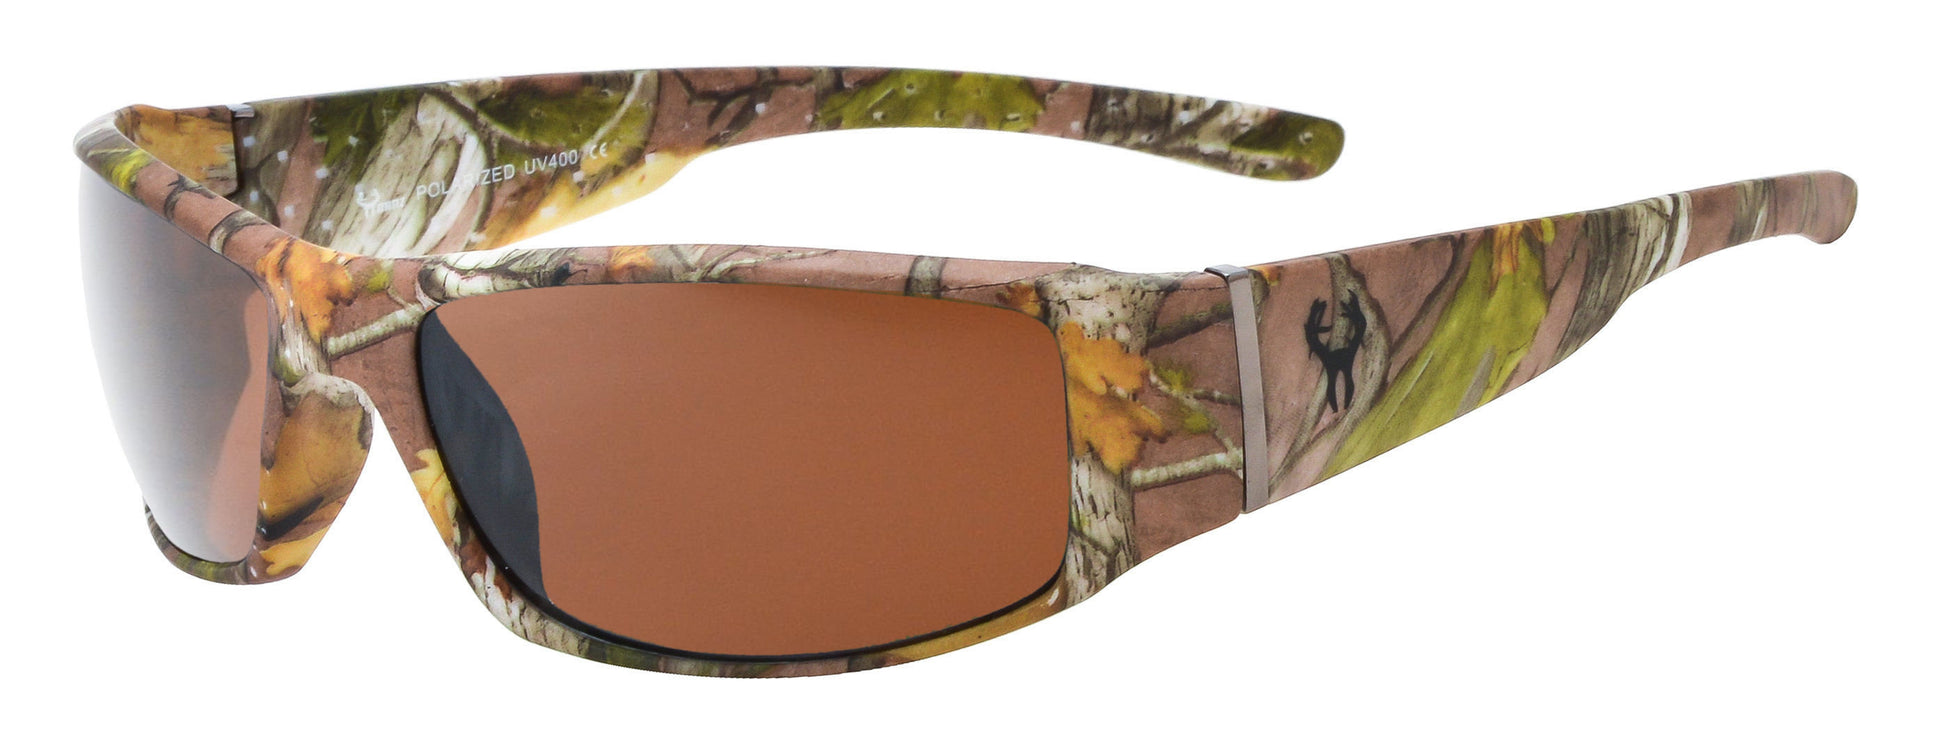 Main image: Hornz Brown Forrest Camouflage Polarized Sunglasses for Men Full Frame Wide Arms & Free Matching Microfiber Pouch – Brown Camo Frame – Amber Lens